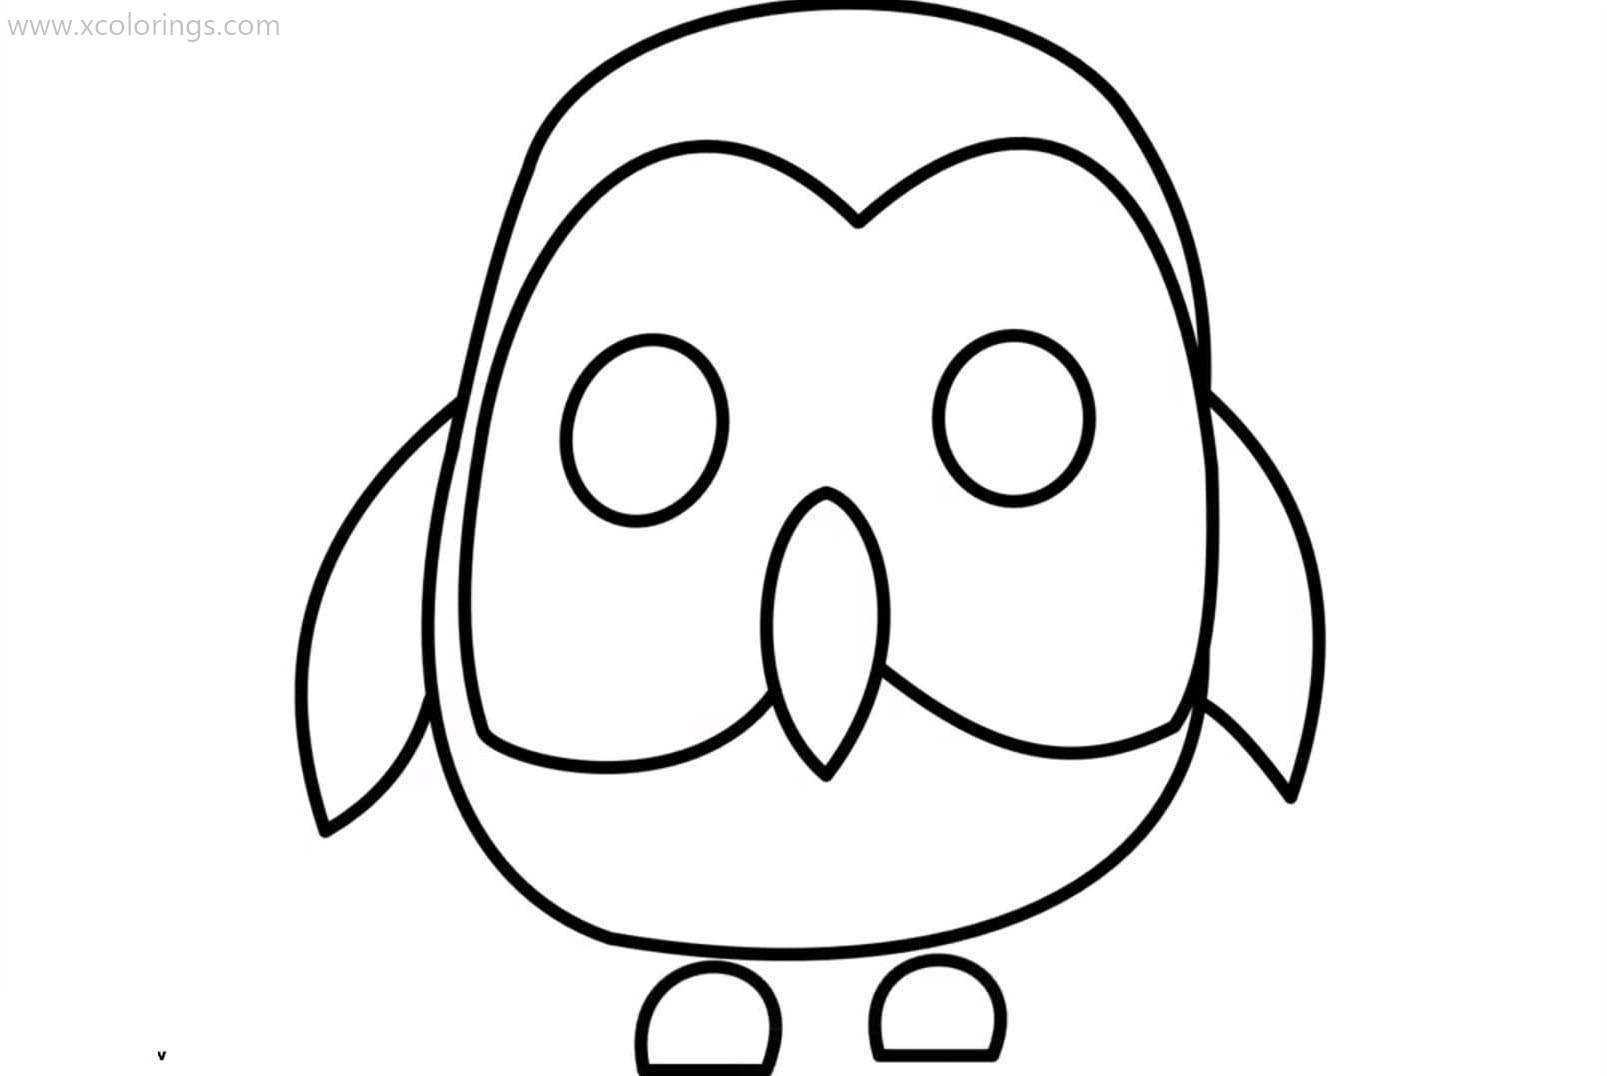 Roblox Adopt Me Coloring Pages Owl - XColorings.com